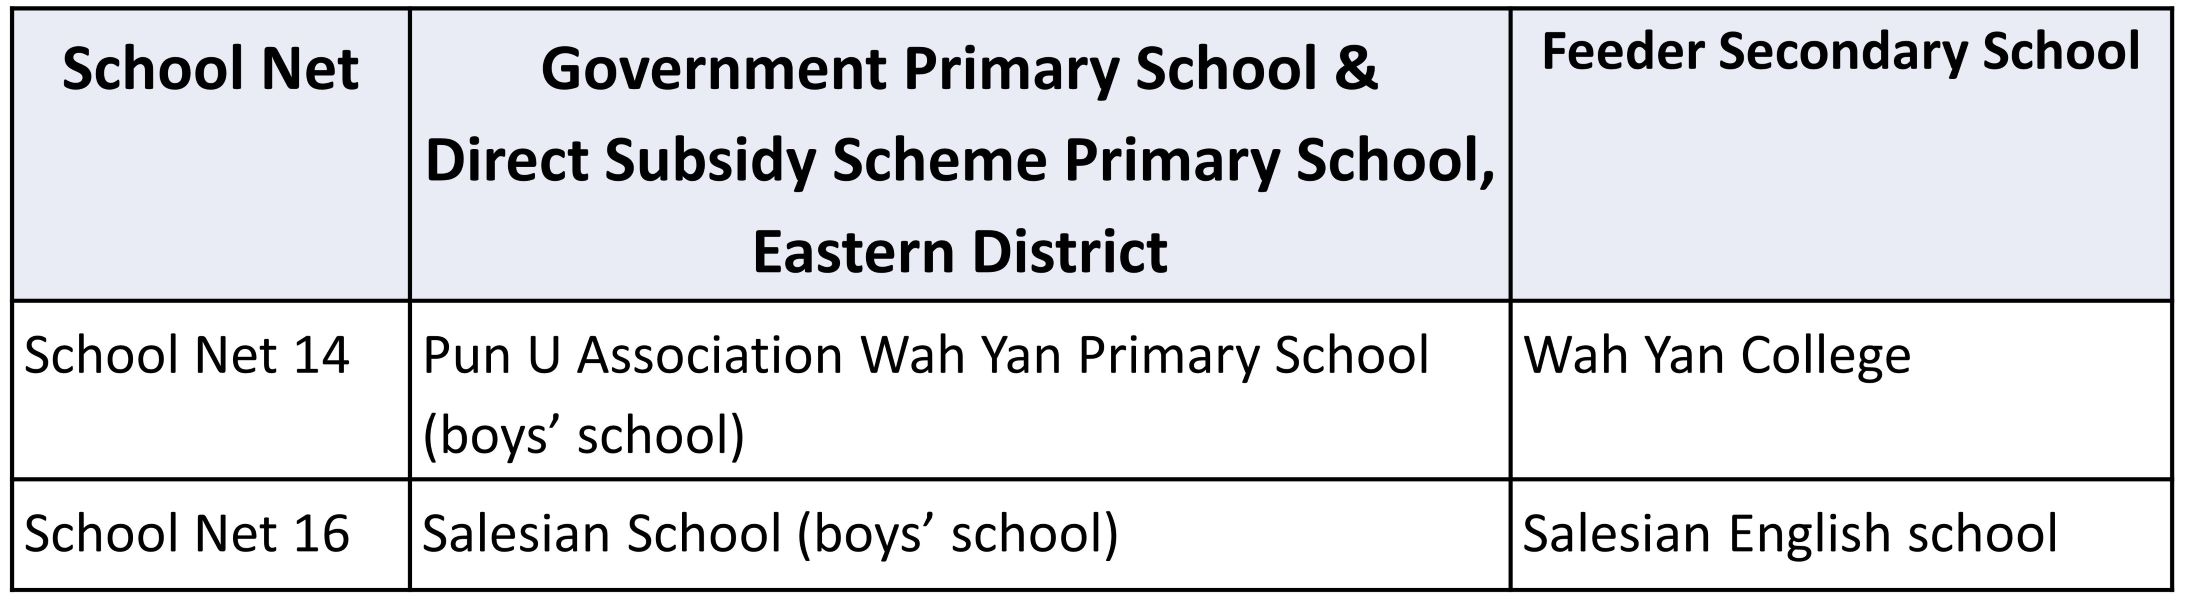 School Net 14 & 16: Eastern District School List and Property Recommendations